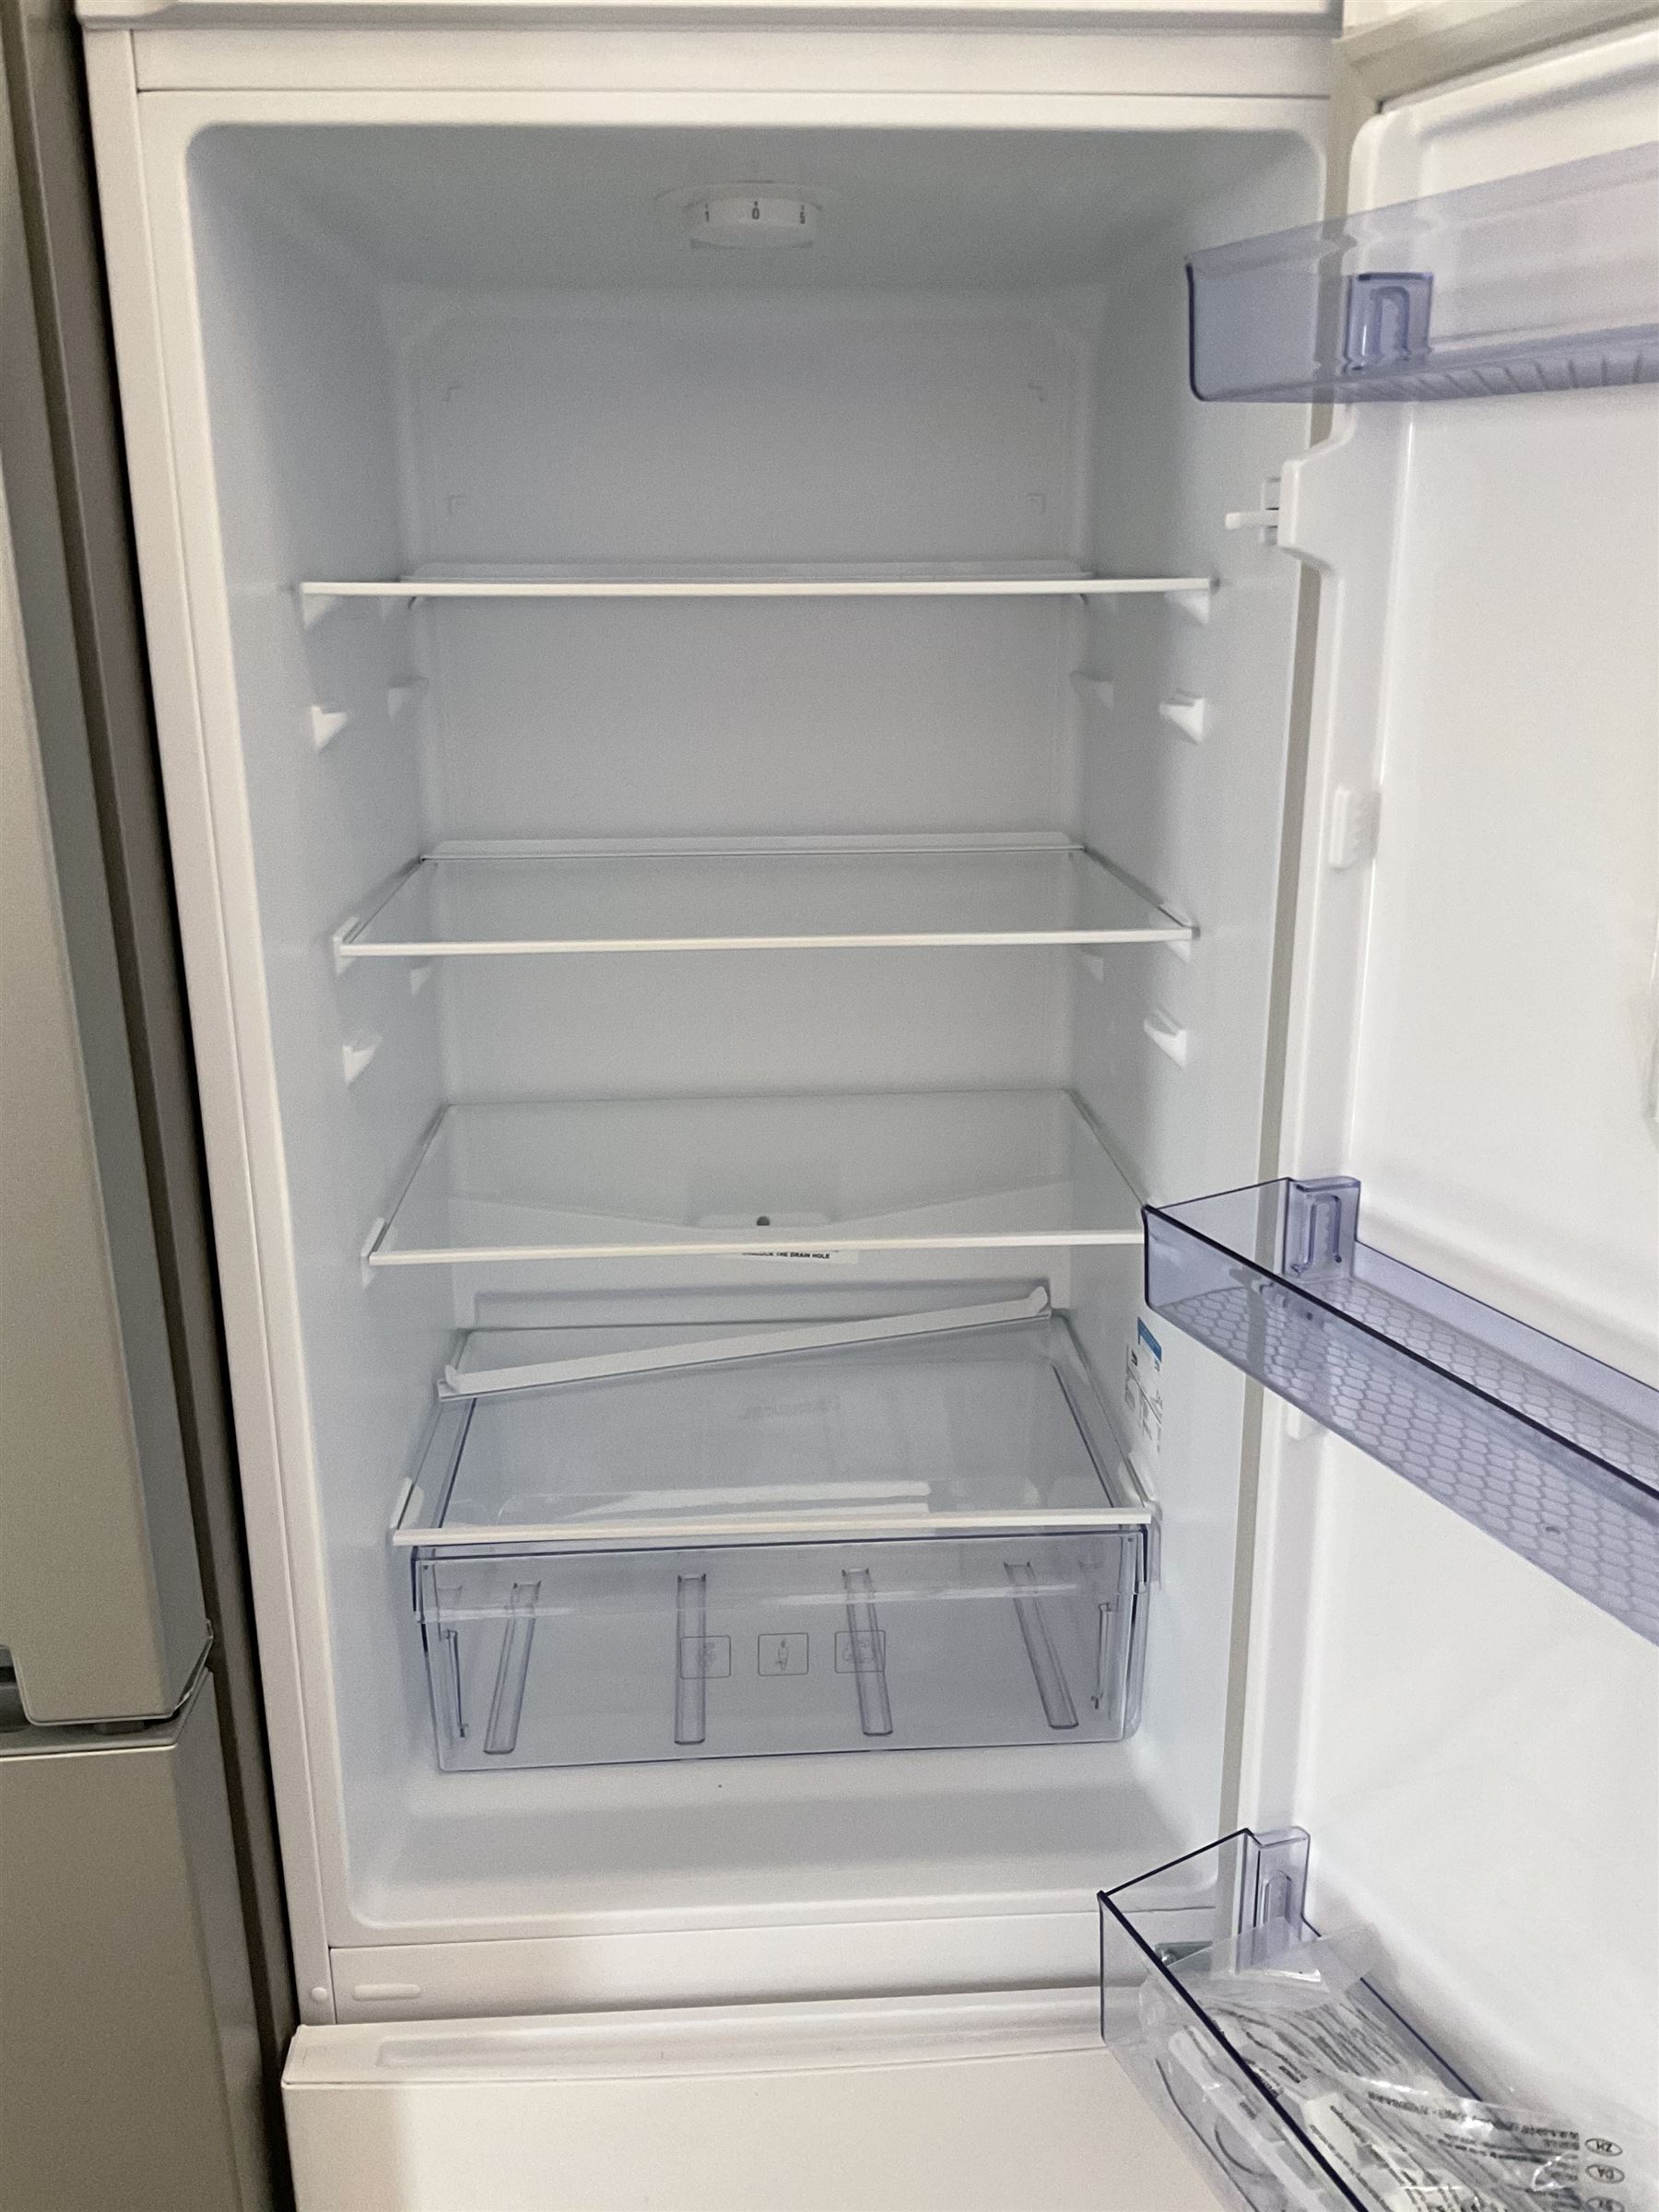 Beko CSG3571W fridge freezer - THIS LOT IS TO BE COLLECTED BY APPOINTMENT FROM DUGGLEBY STORAGE - Image 2 of 2